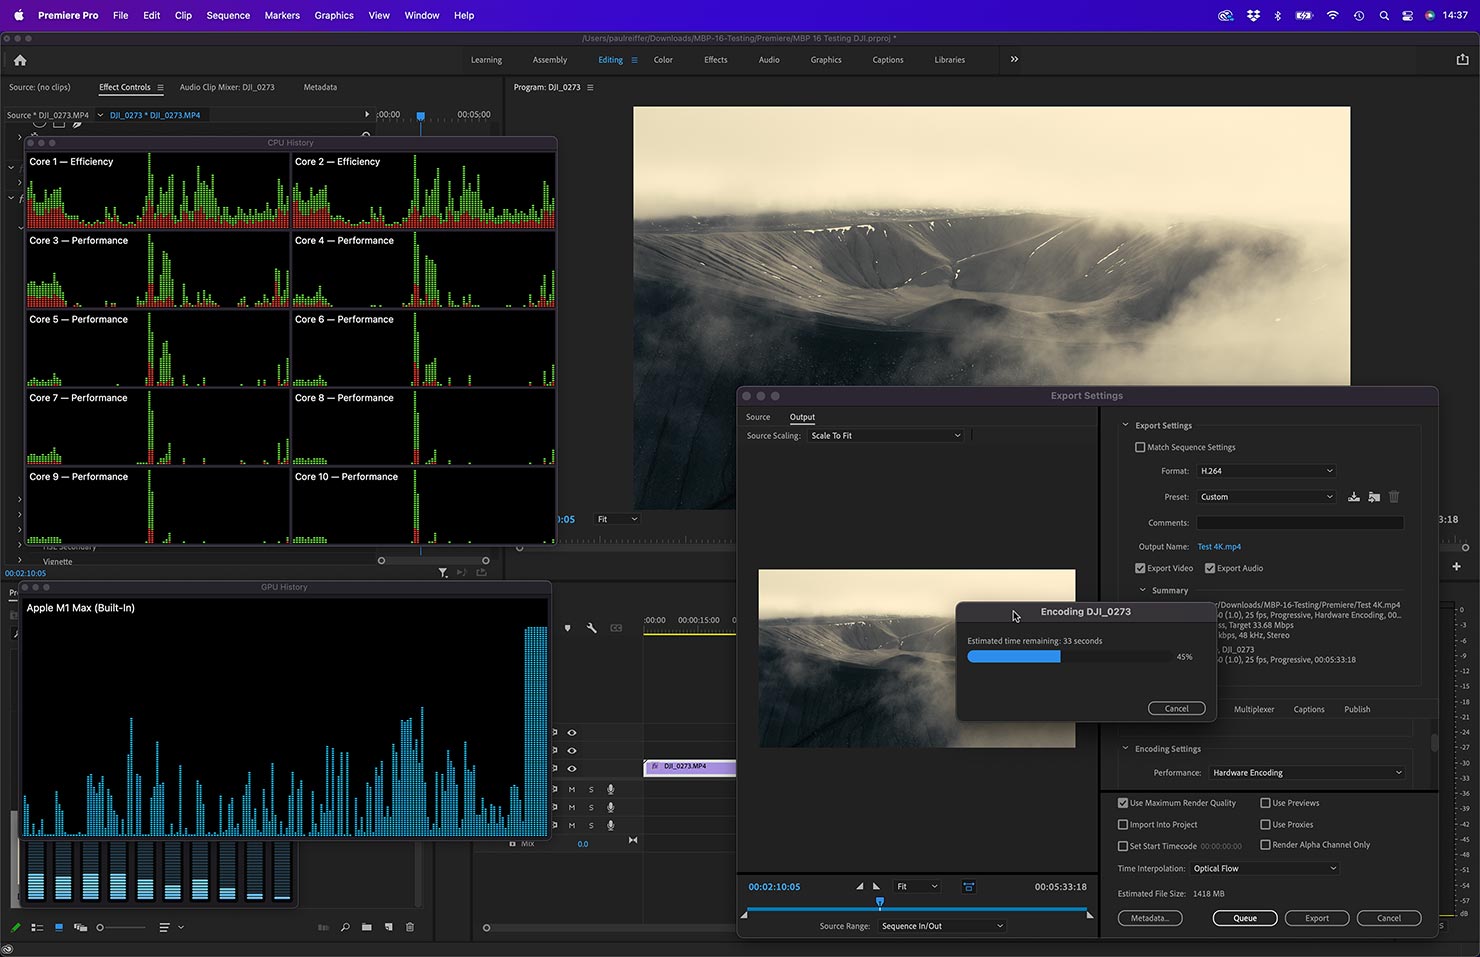 Adobe Premiere Pro 4k Export Speed Output 16 Inch 64GB 150MP Phase One Apple M1 MacBook Pro 16 14 inch Max Launch Release Paul Reiffer Testing Benchmark